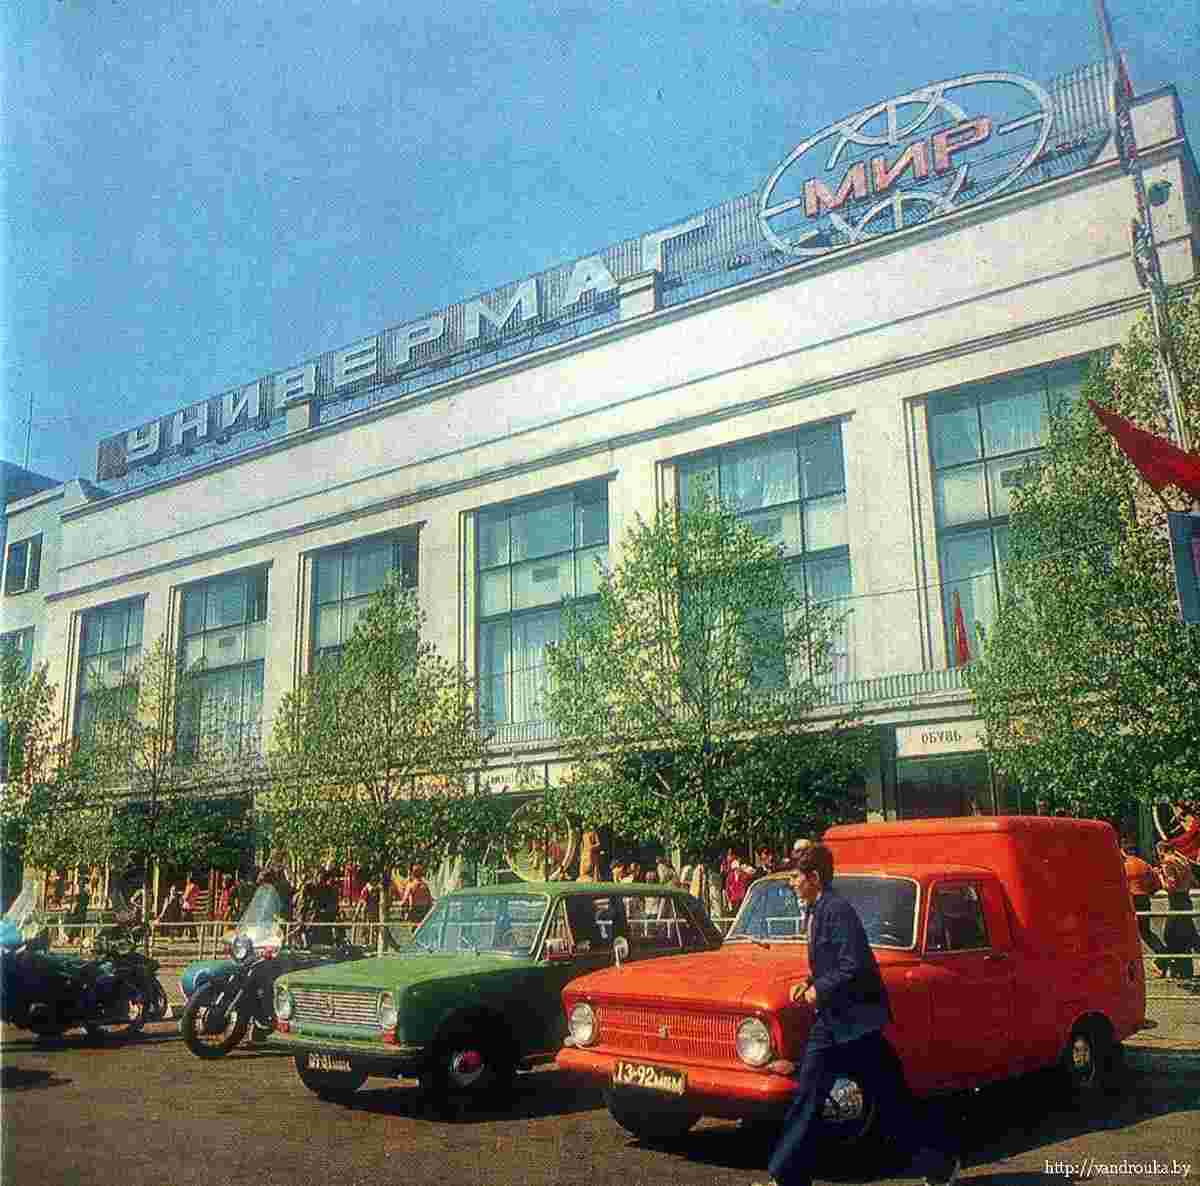 Barysaw. Department store, 1970s